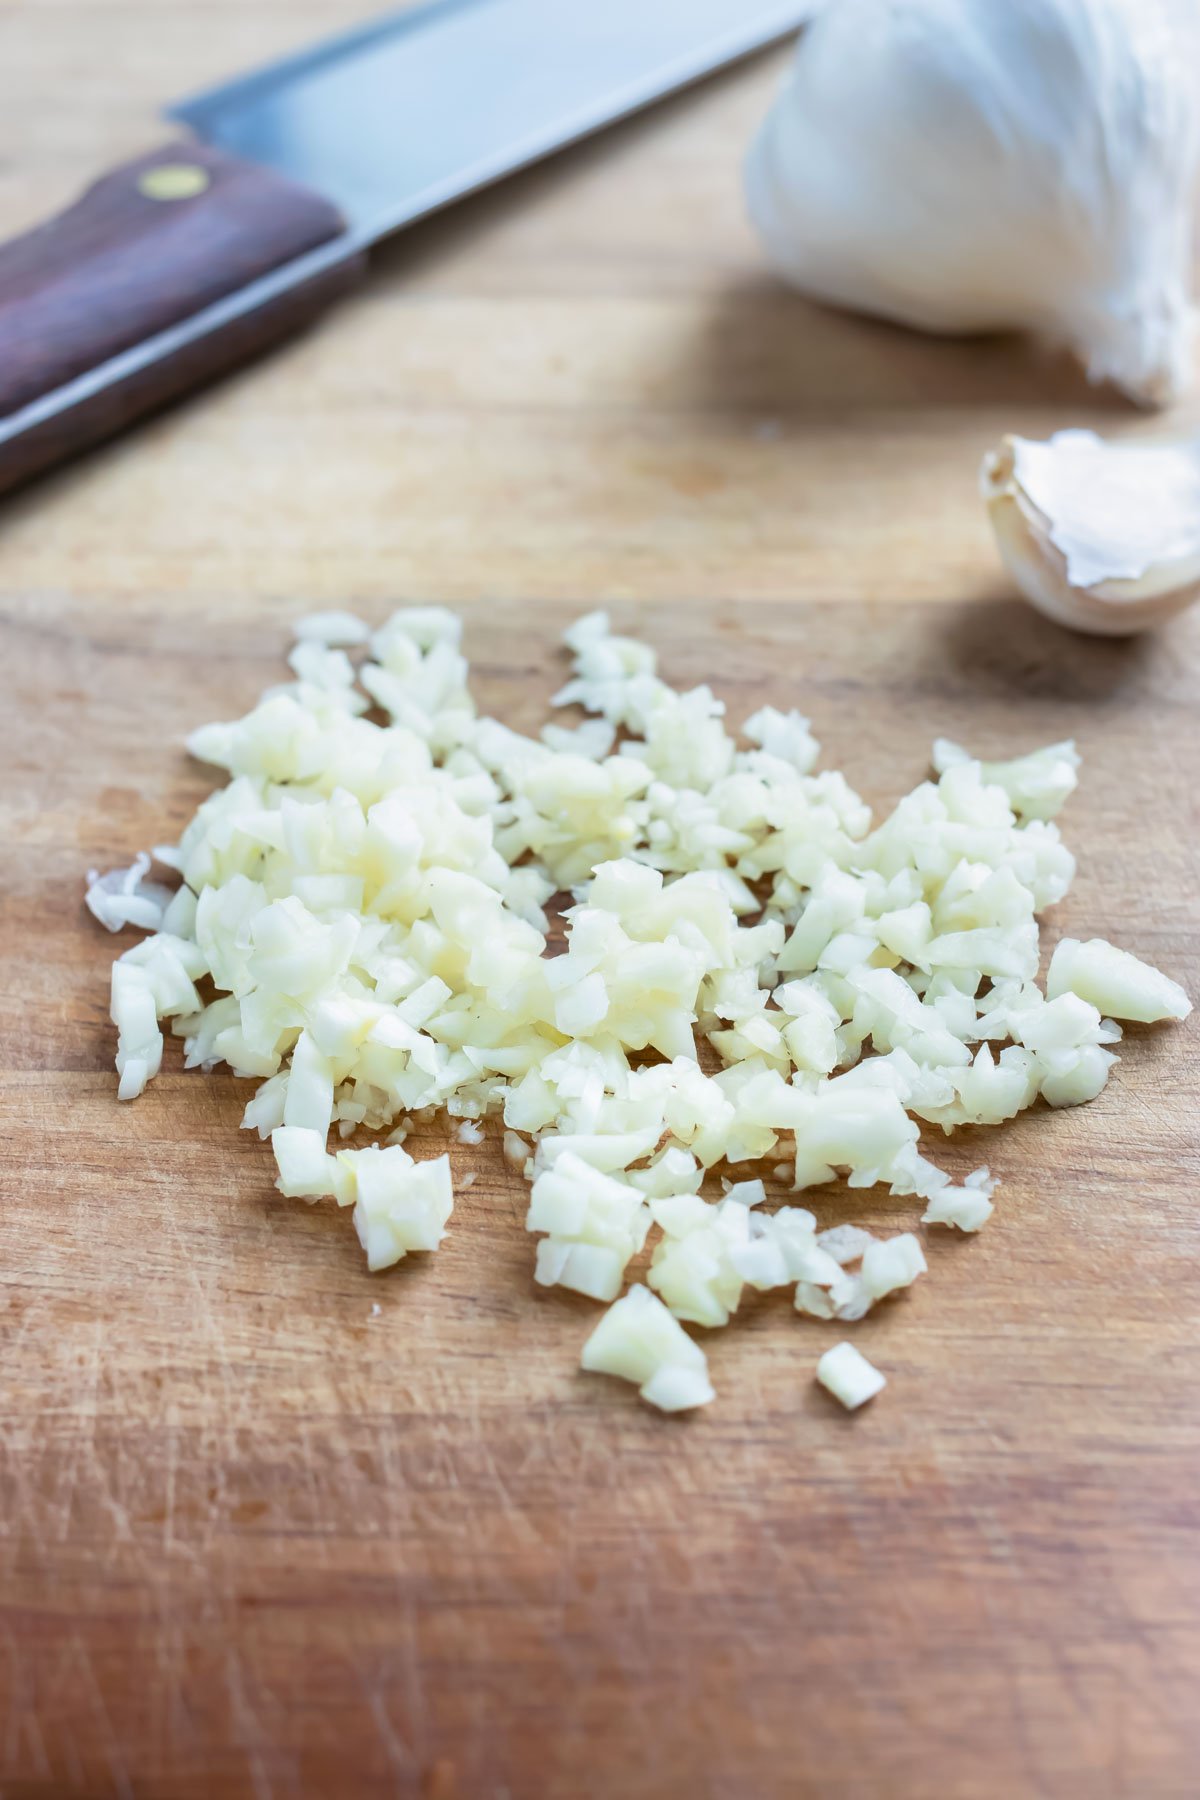 Minced garlic is shown on a cutting board next to a knife.